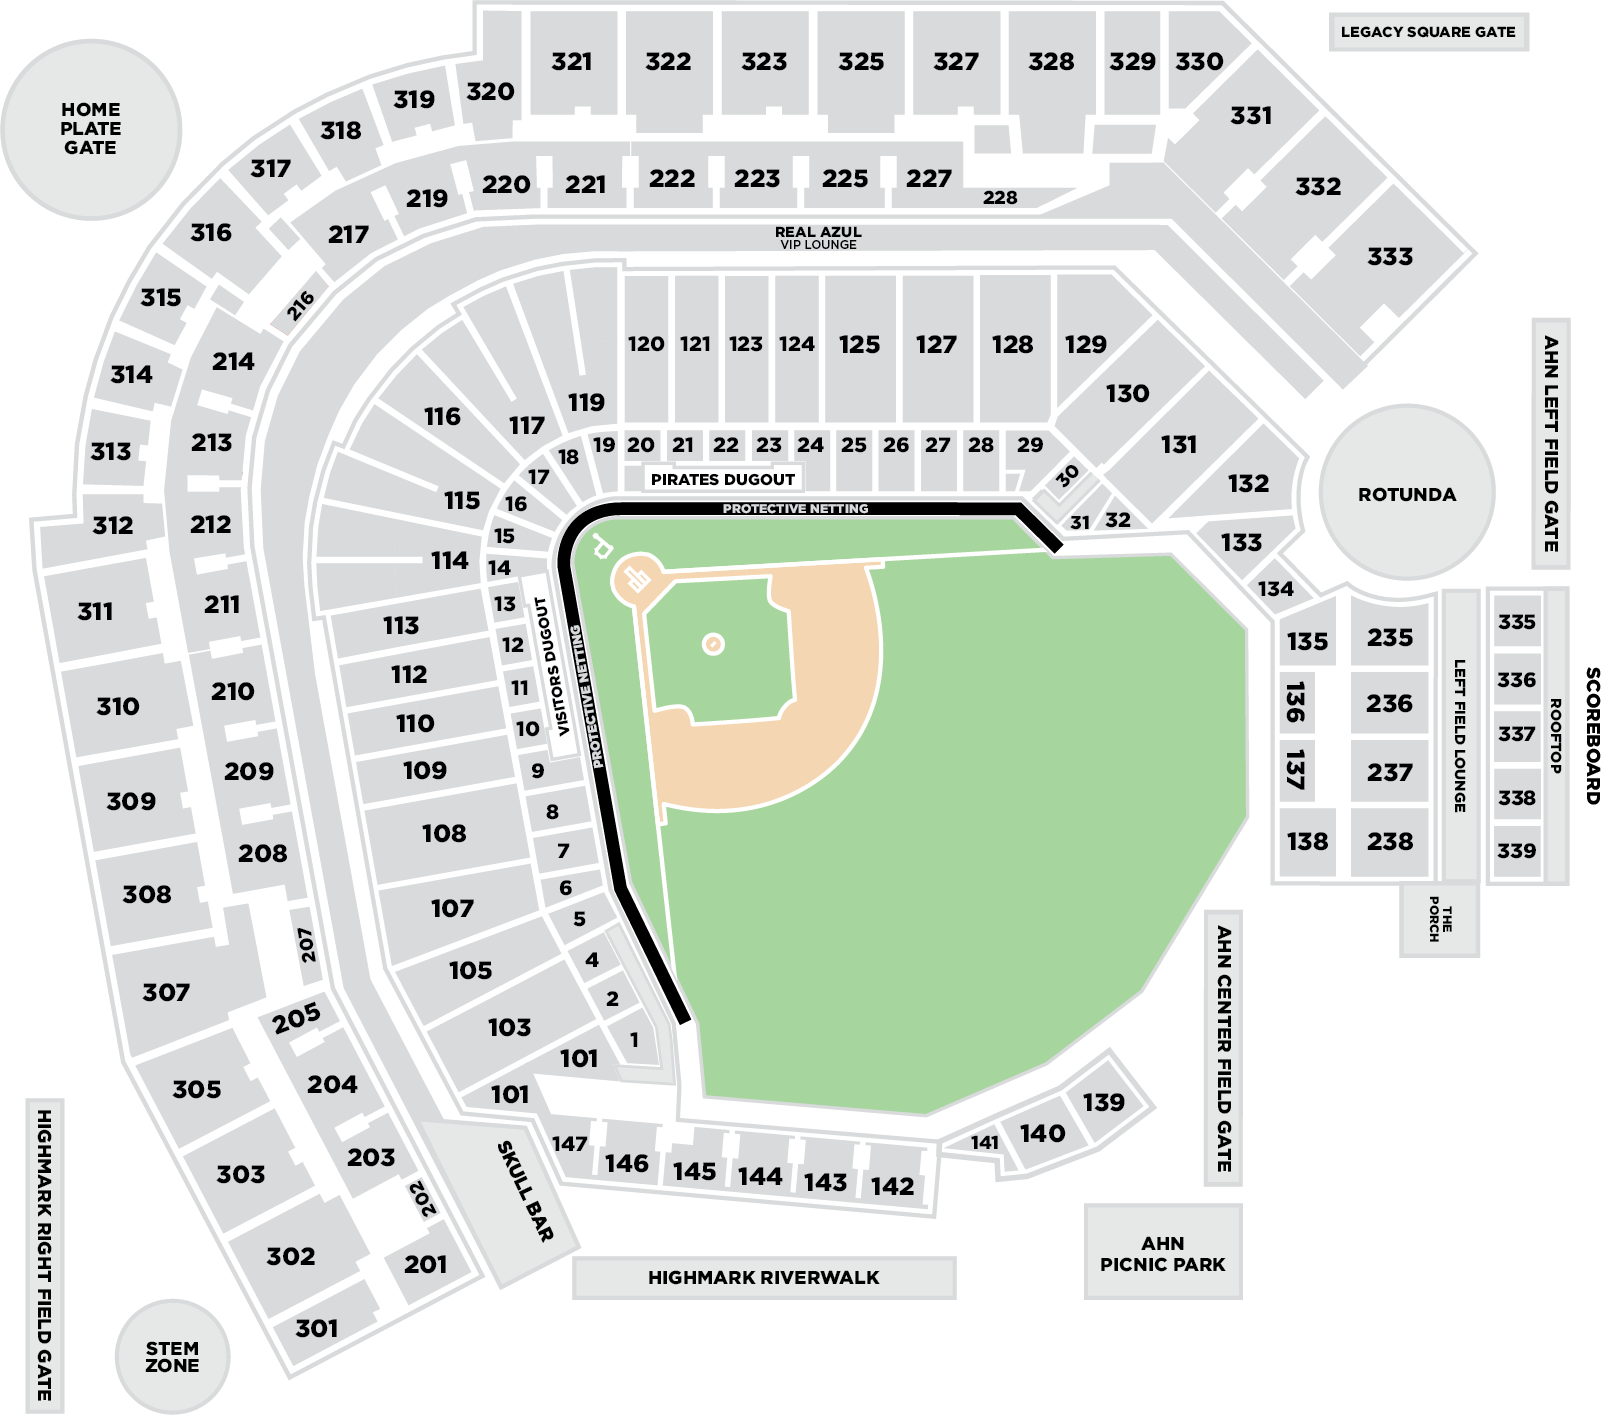 PNC Park Tickets with No Fees at Ticket Club